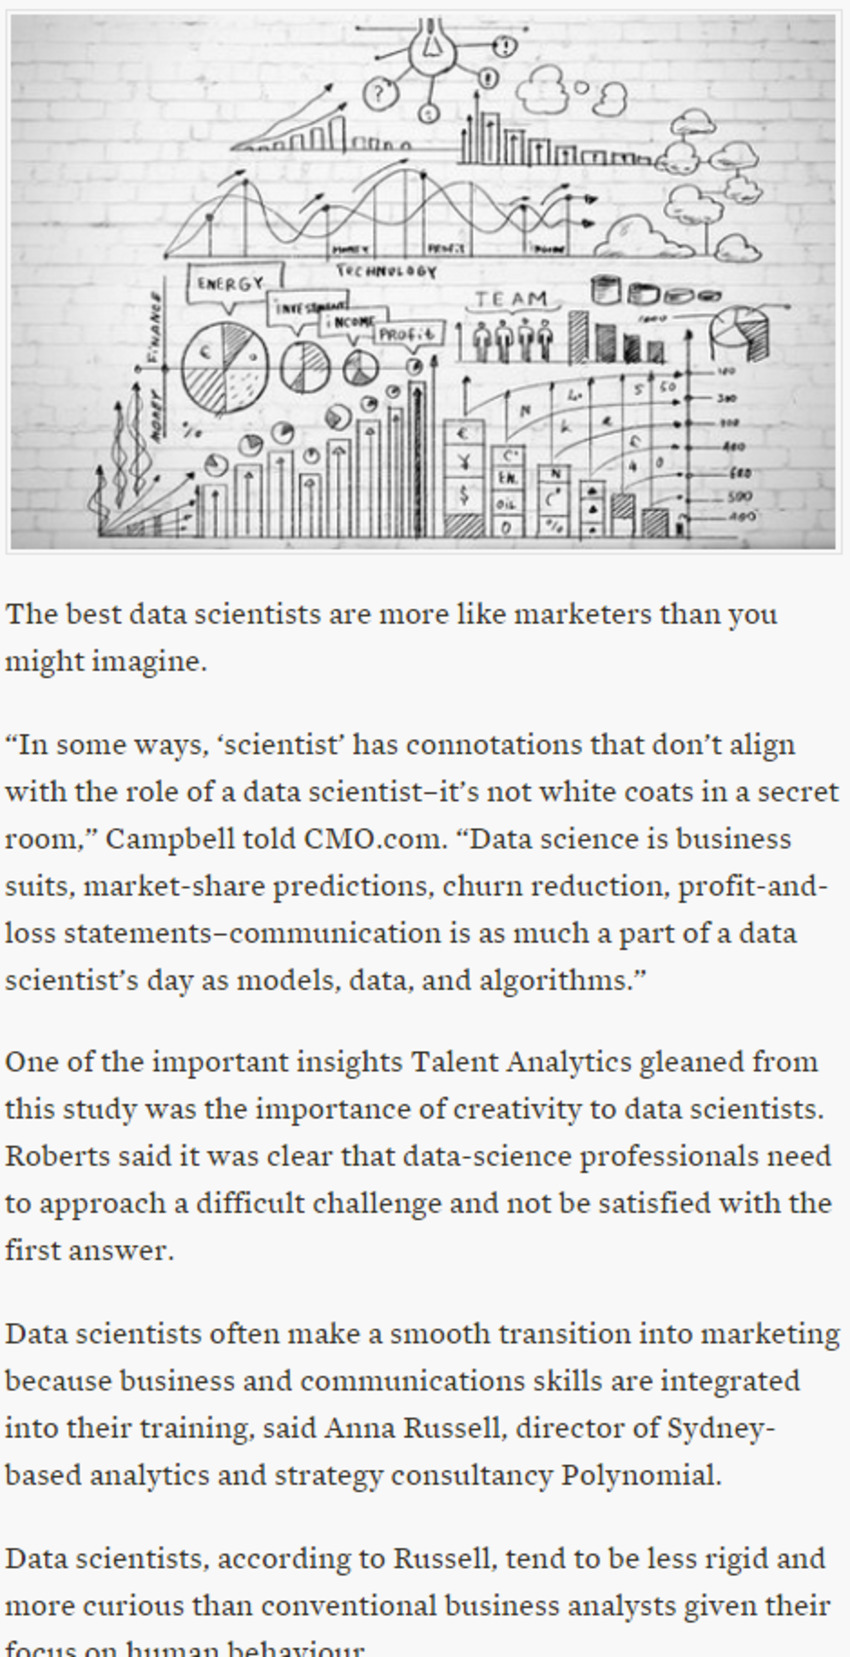 Today's Data Scientists: More Marketer, Less Scientist - CMO.com | The MarTech Digest | Scoop.it